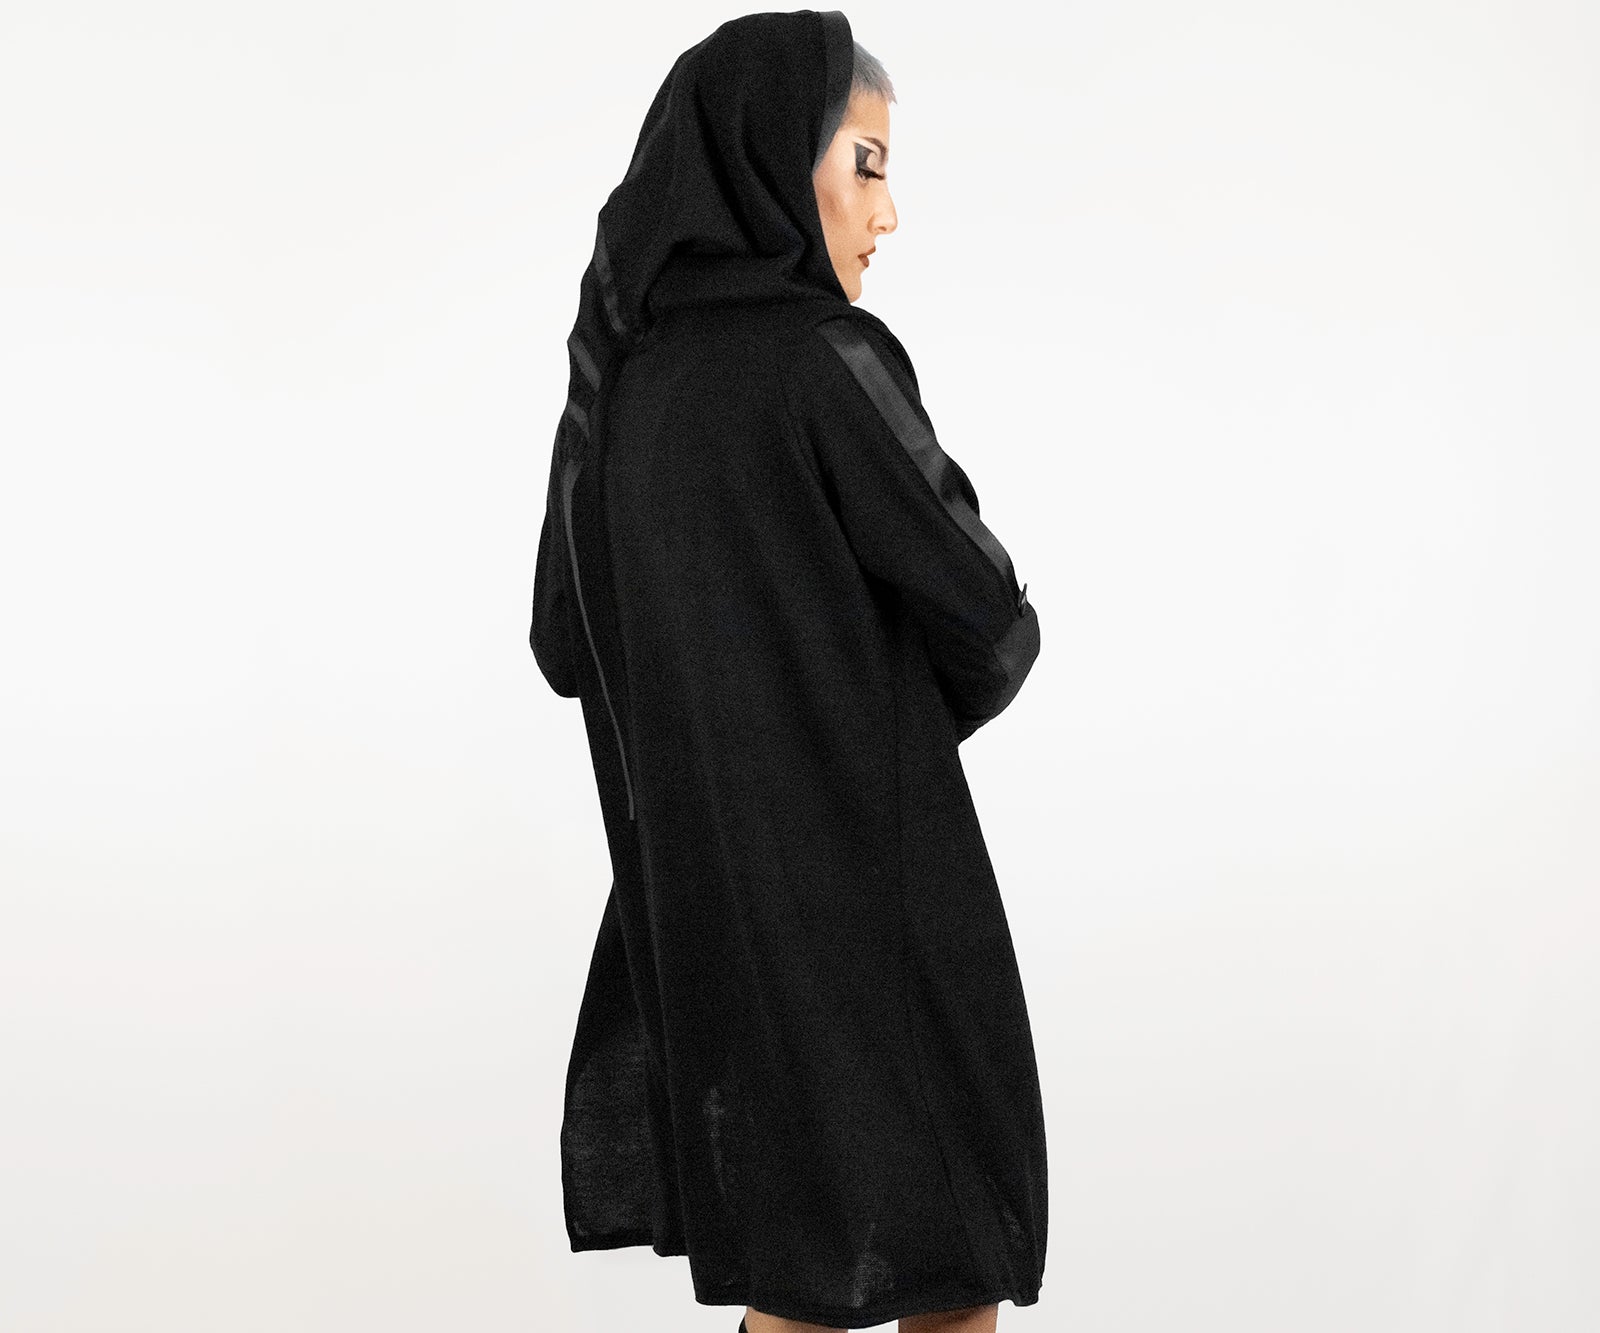 Nostoc Hooded Sweater